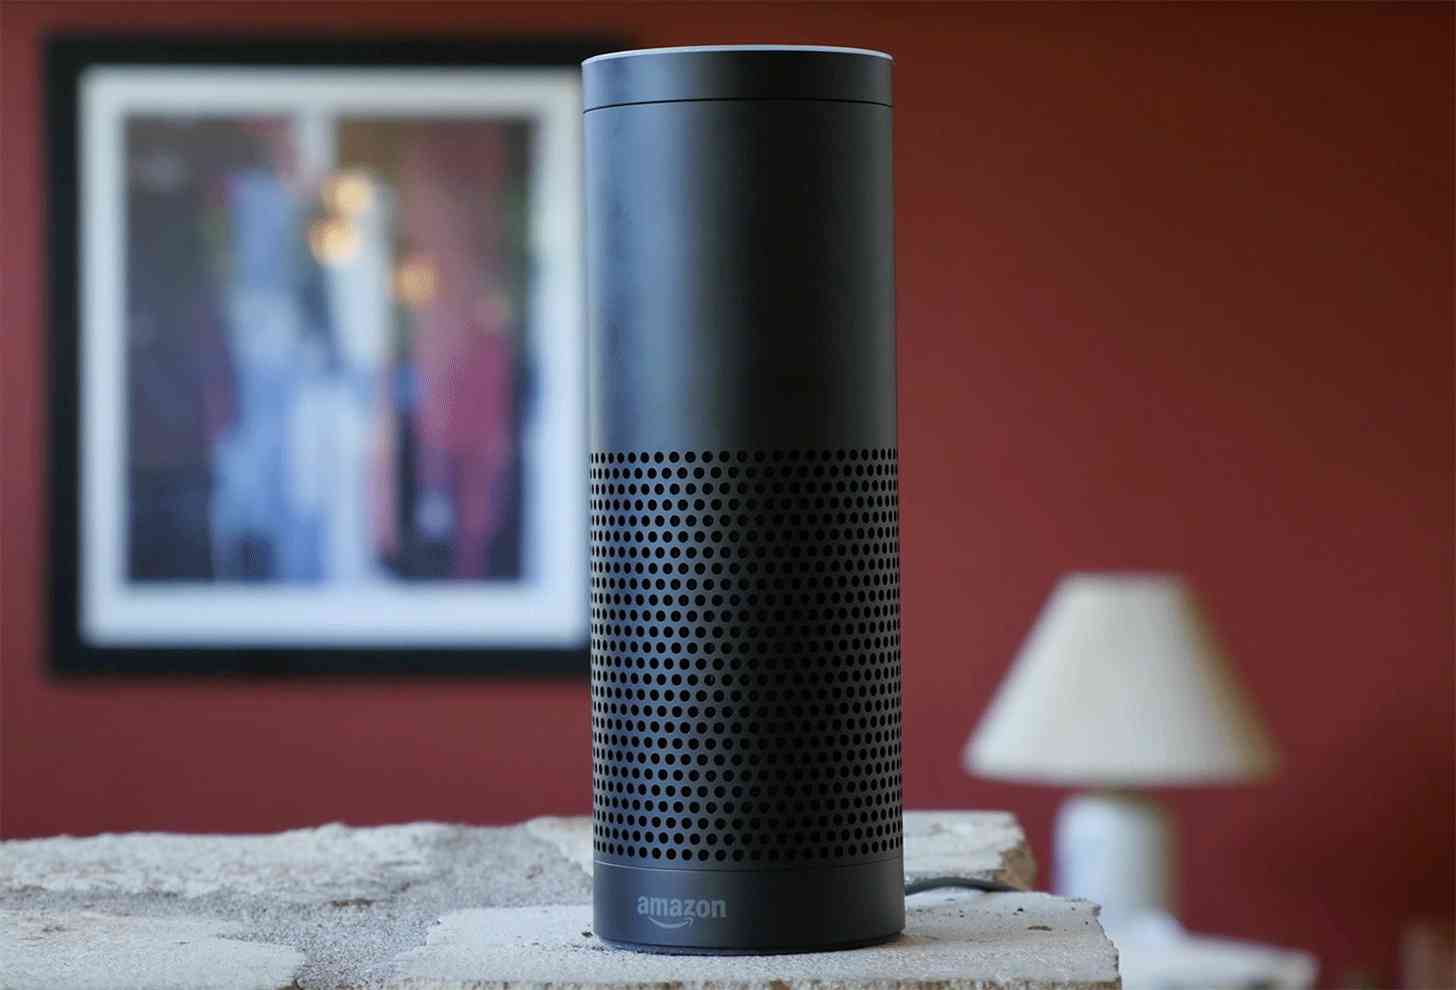 Amazon Echo hands-on review